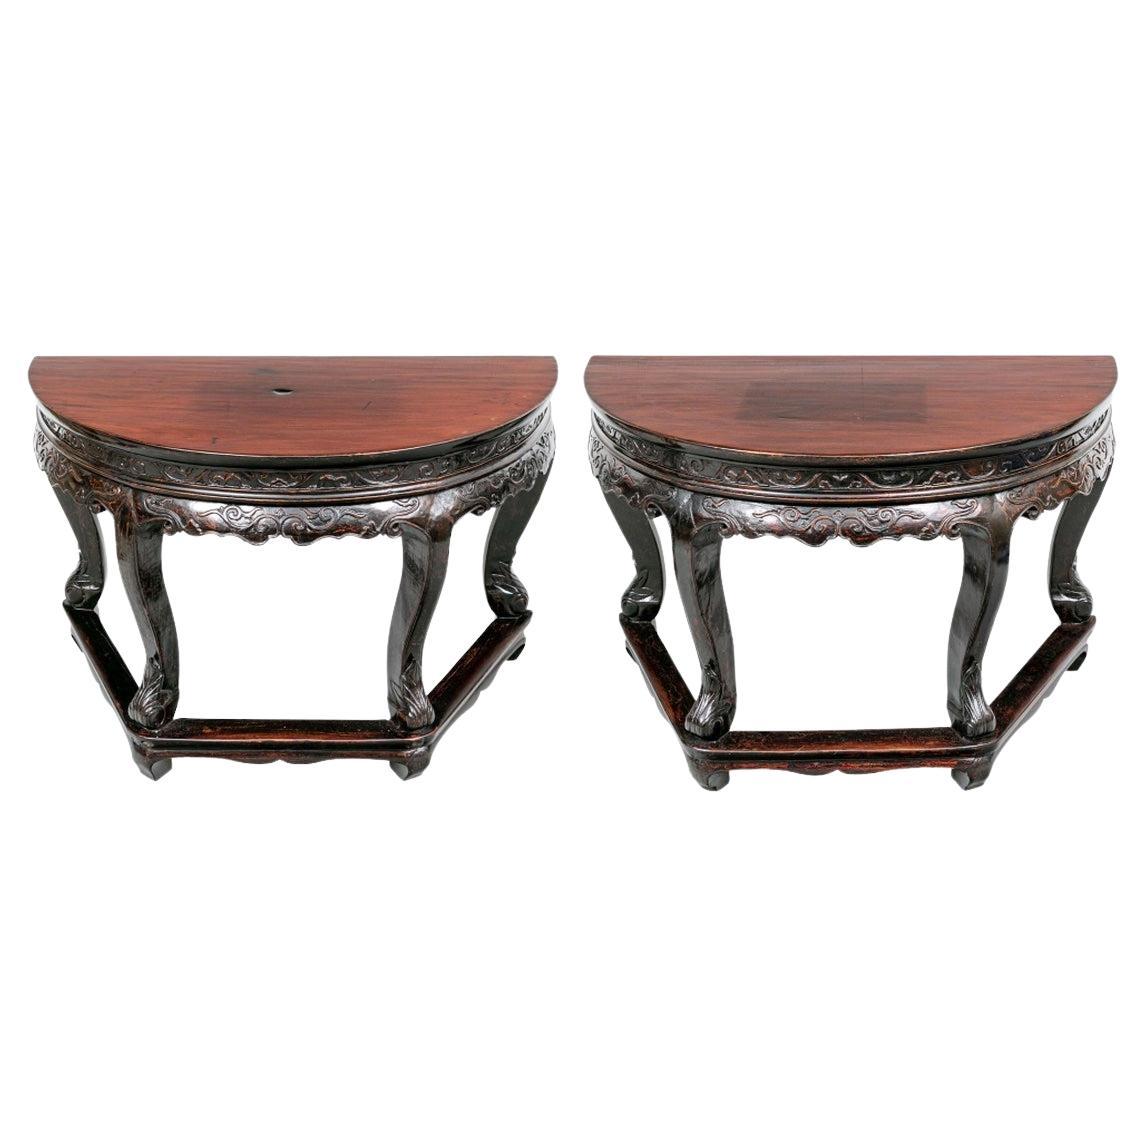 Pair of Chinese Carved Demi-Lune Consoles or Center Table